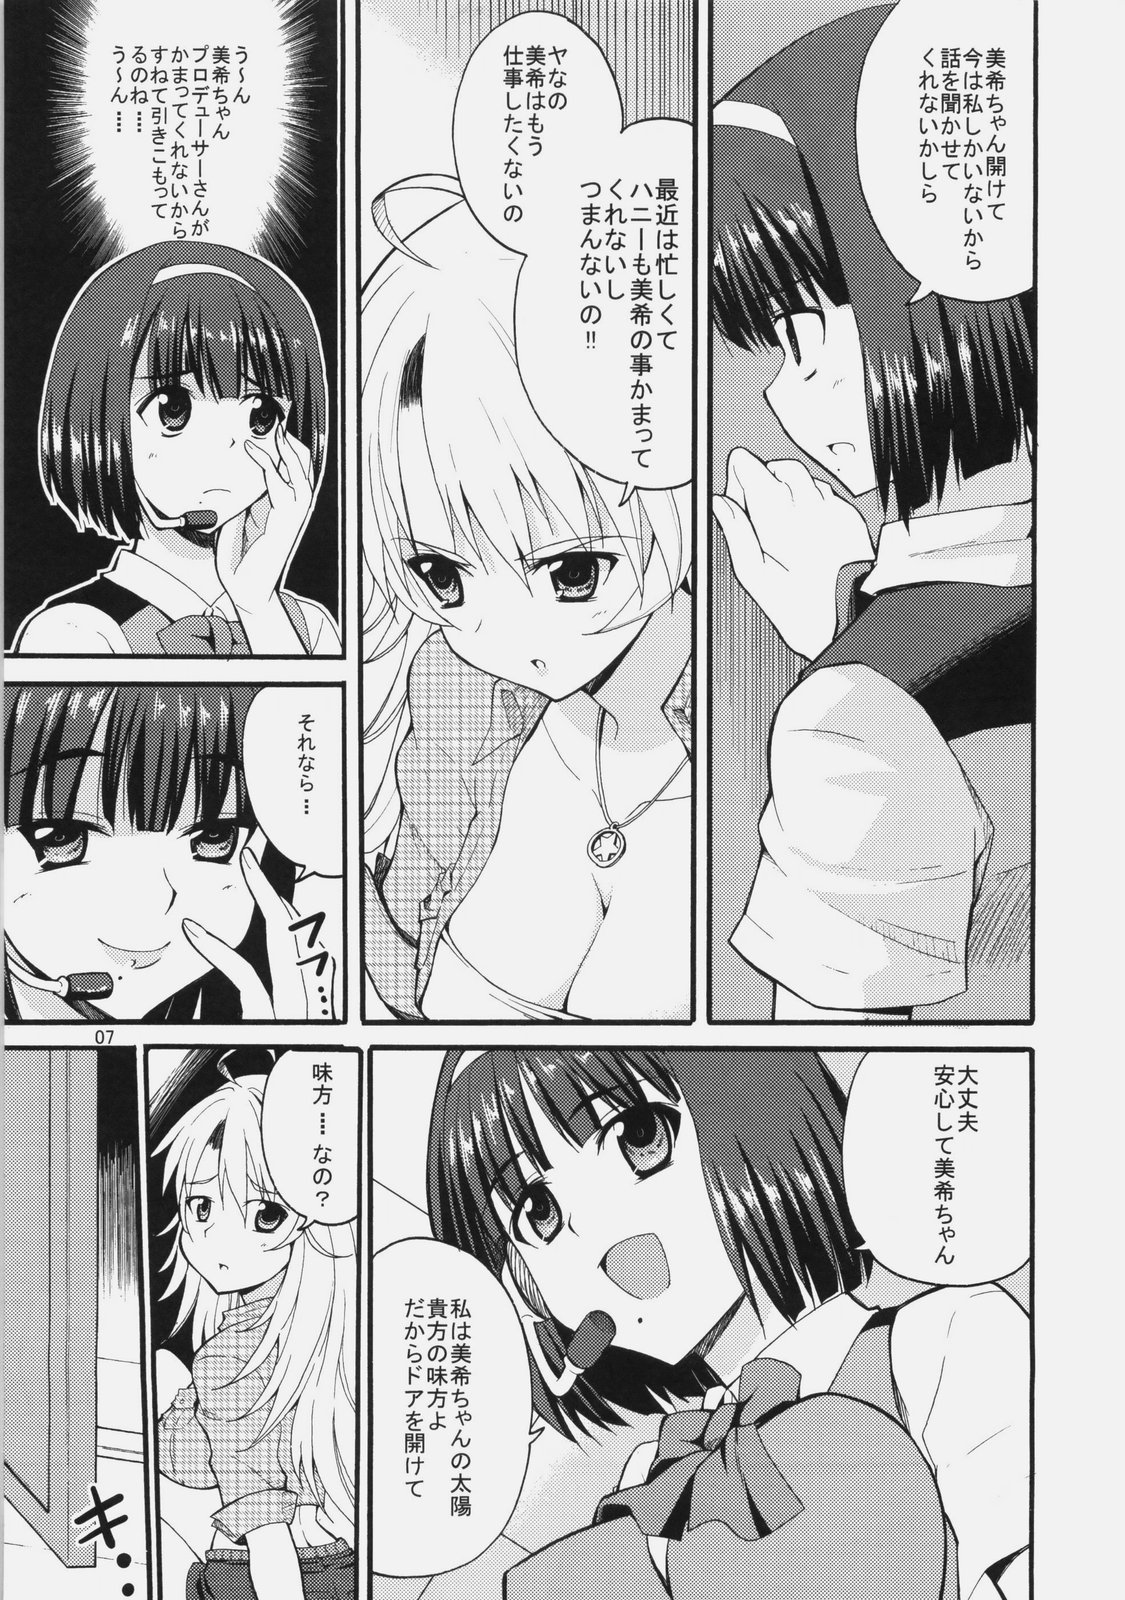 (Appeal For you!!) [Sweet Avenue (Kaduchi)] OREPRO 27 (THE IDOLM@STER) page 6 full